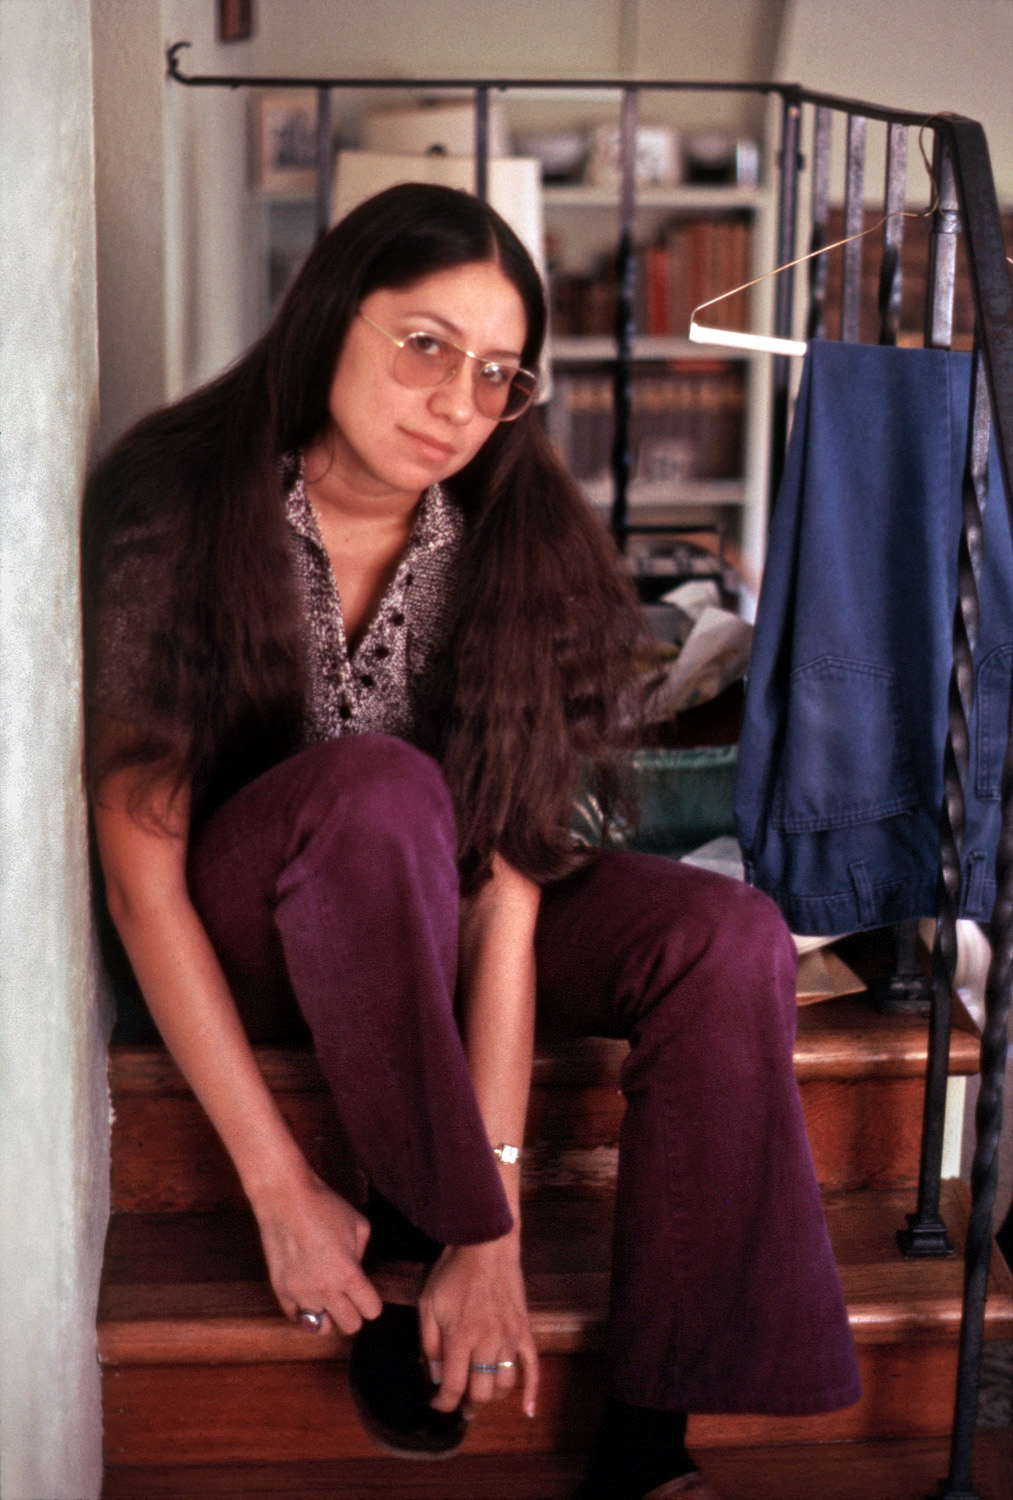 My sister-in-law in the living room of my folks' Larkspur, California home. The stairs lead up to the bedrooms on the second floor, in one of which I was still domiciled, hence the freshly laundered pair of pants my mother has conveniently placed for my retrieval. My Ektachrome slide. View full size.